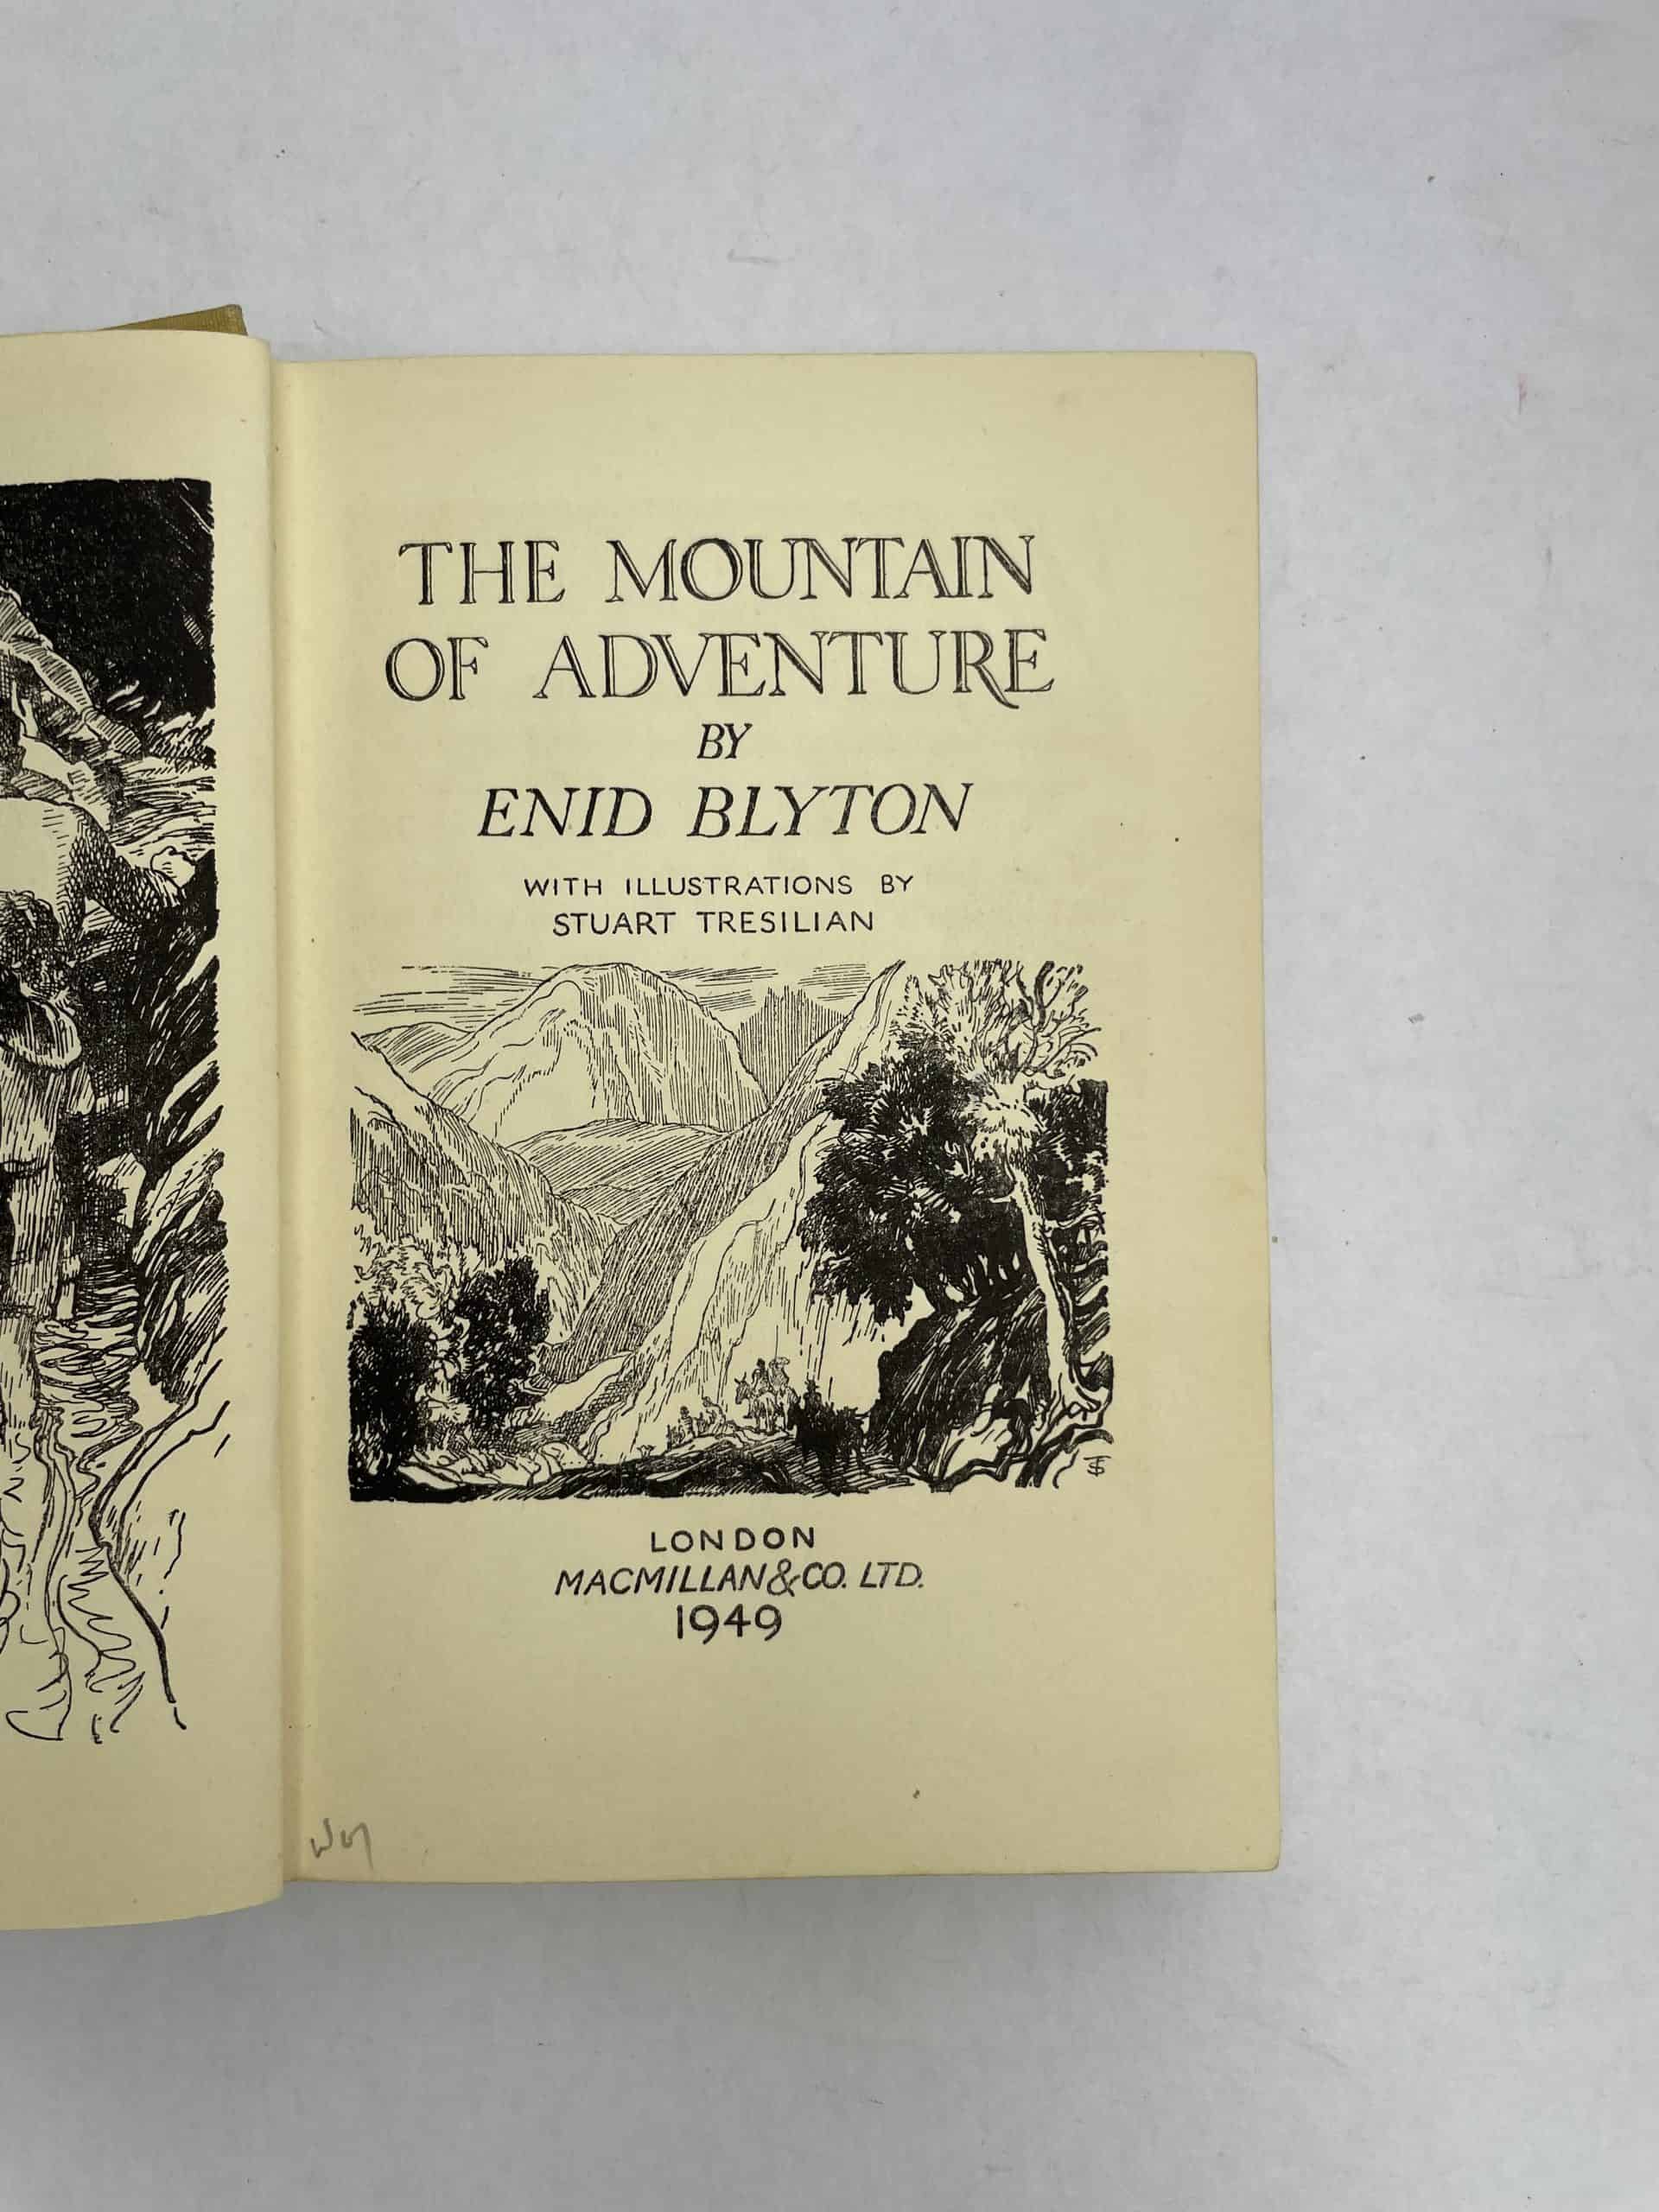 enid blyton the mountain of adventure first edition2